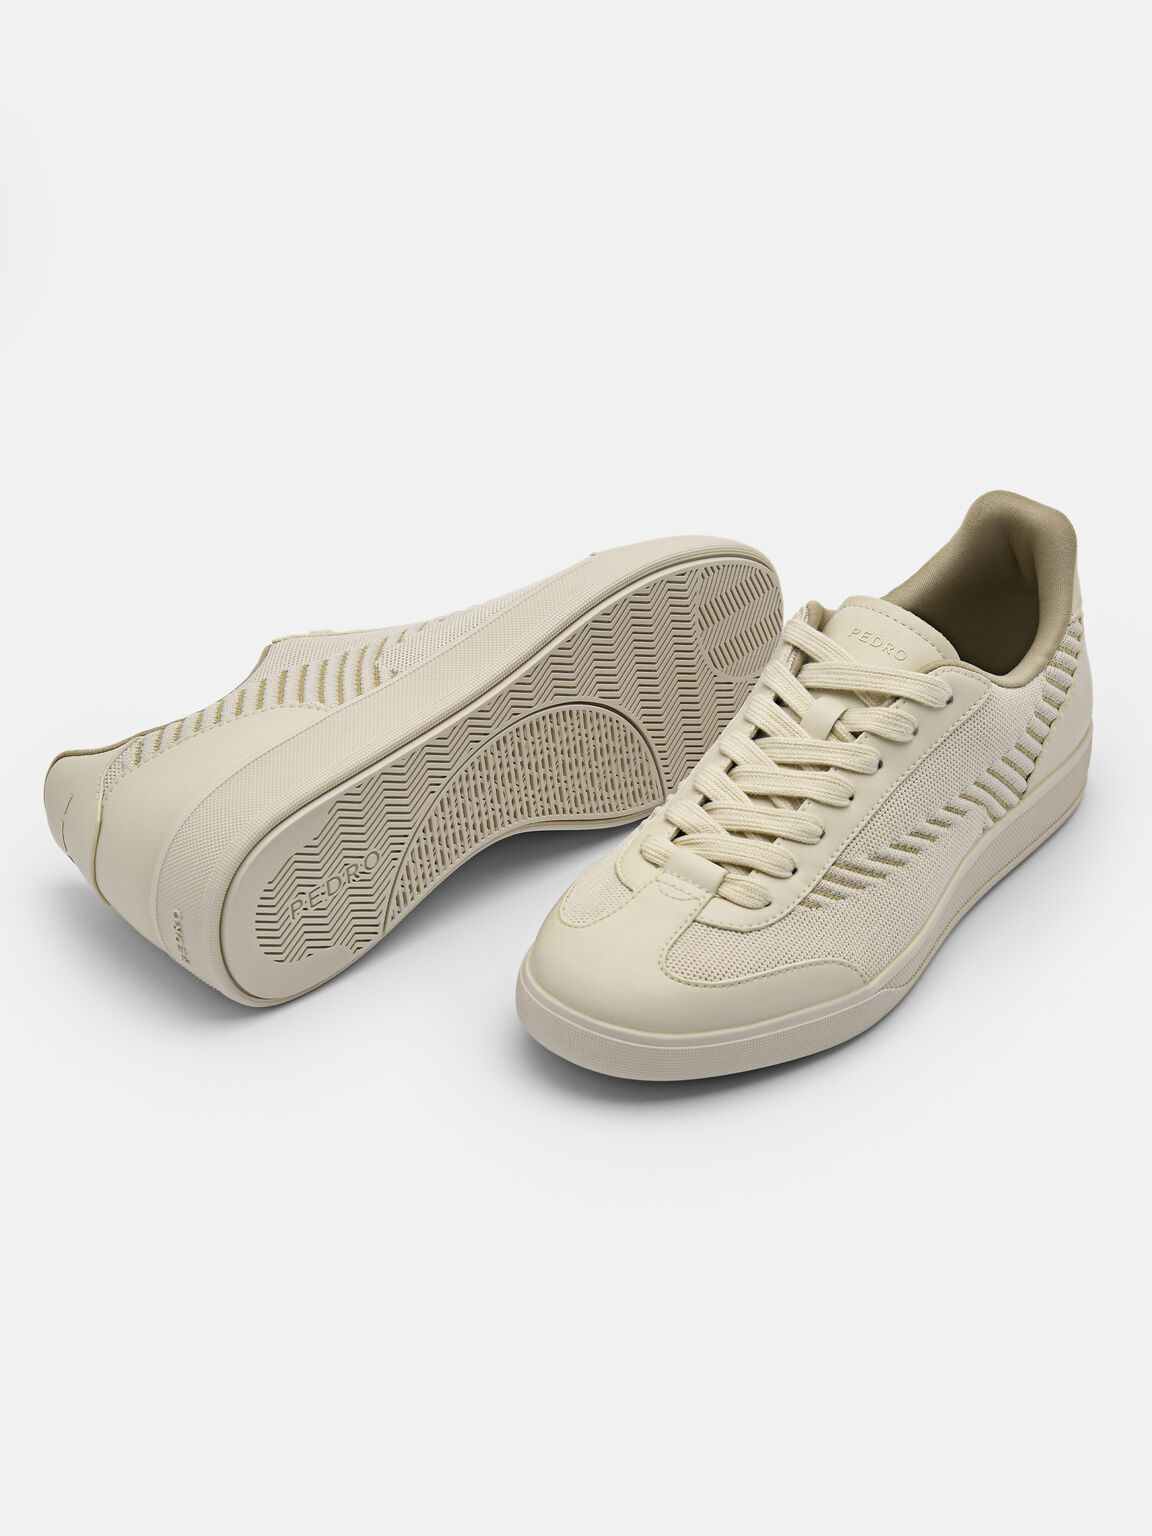 Women's rePEDRO Knitted Sneakers, Sand, hi-res